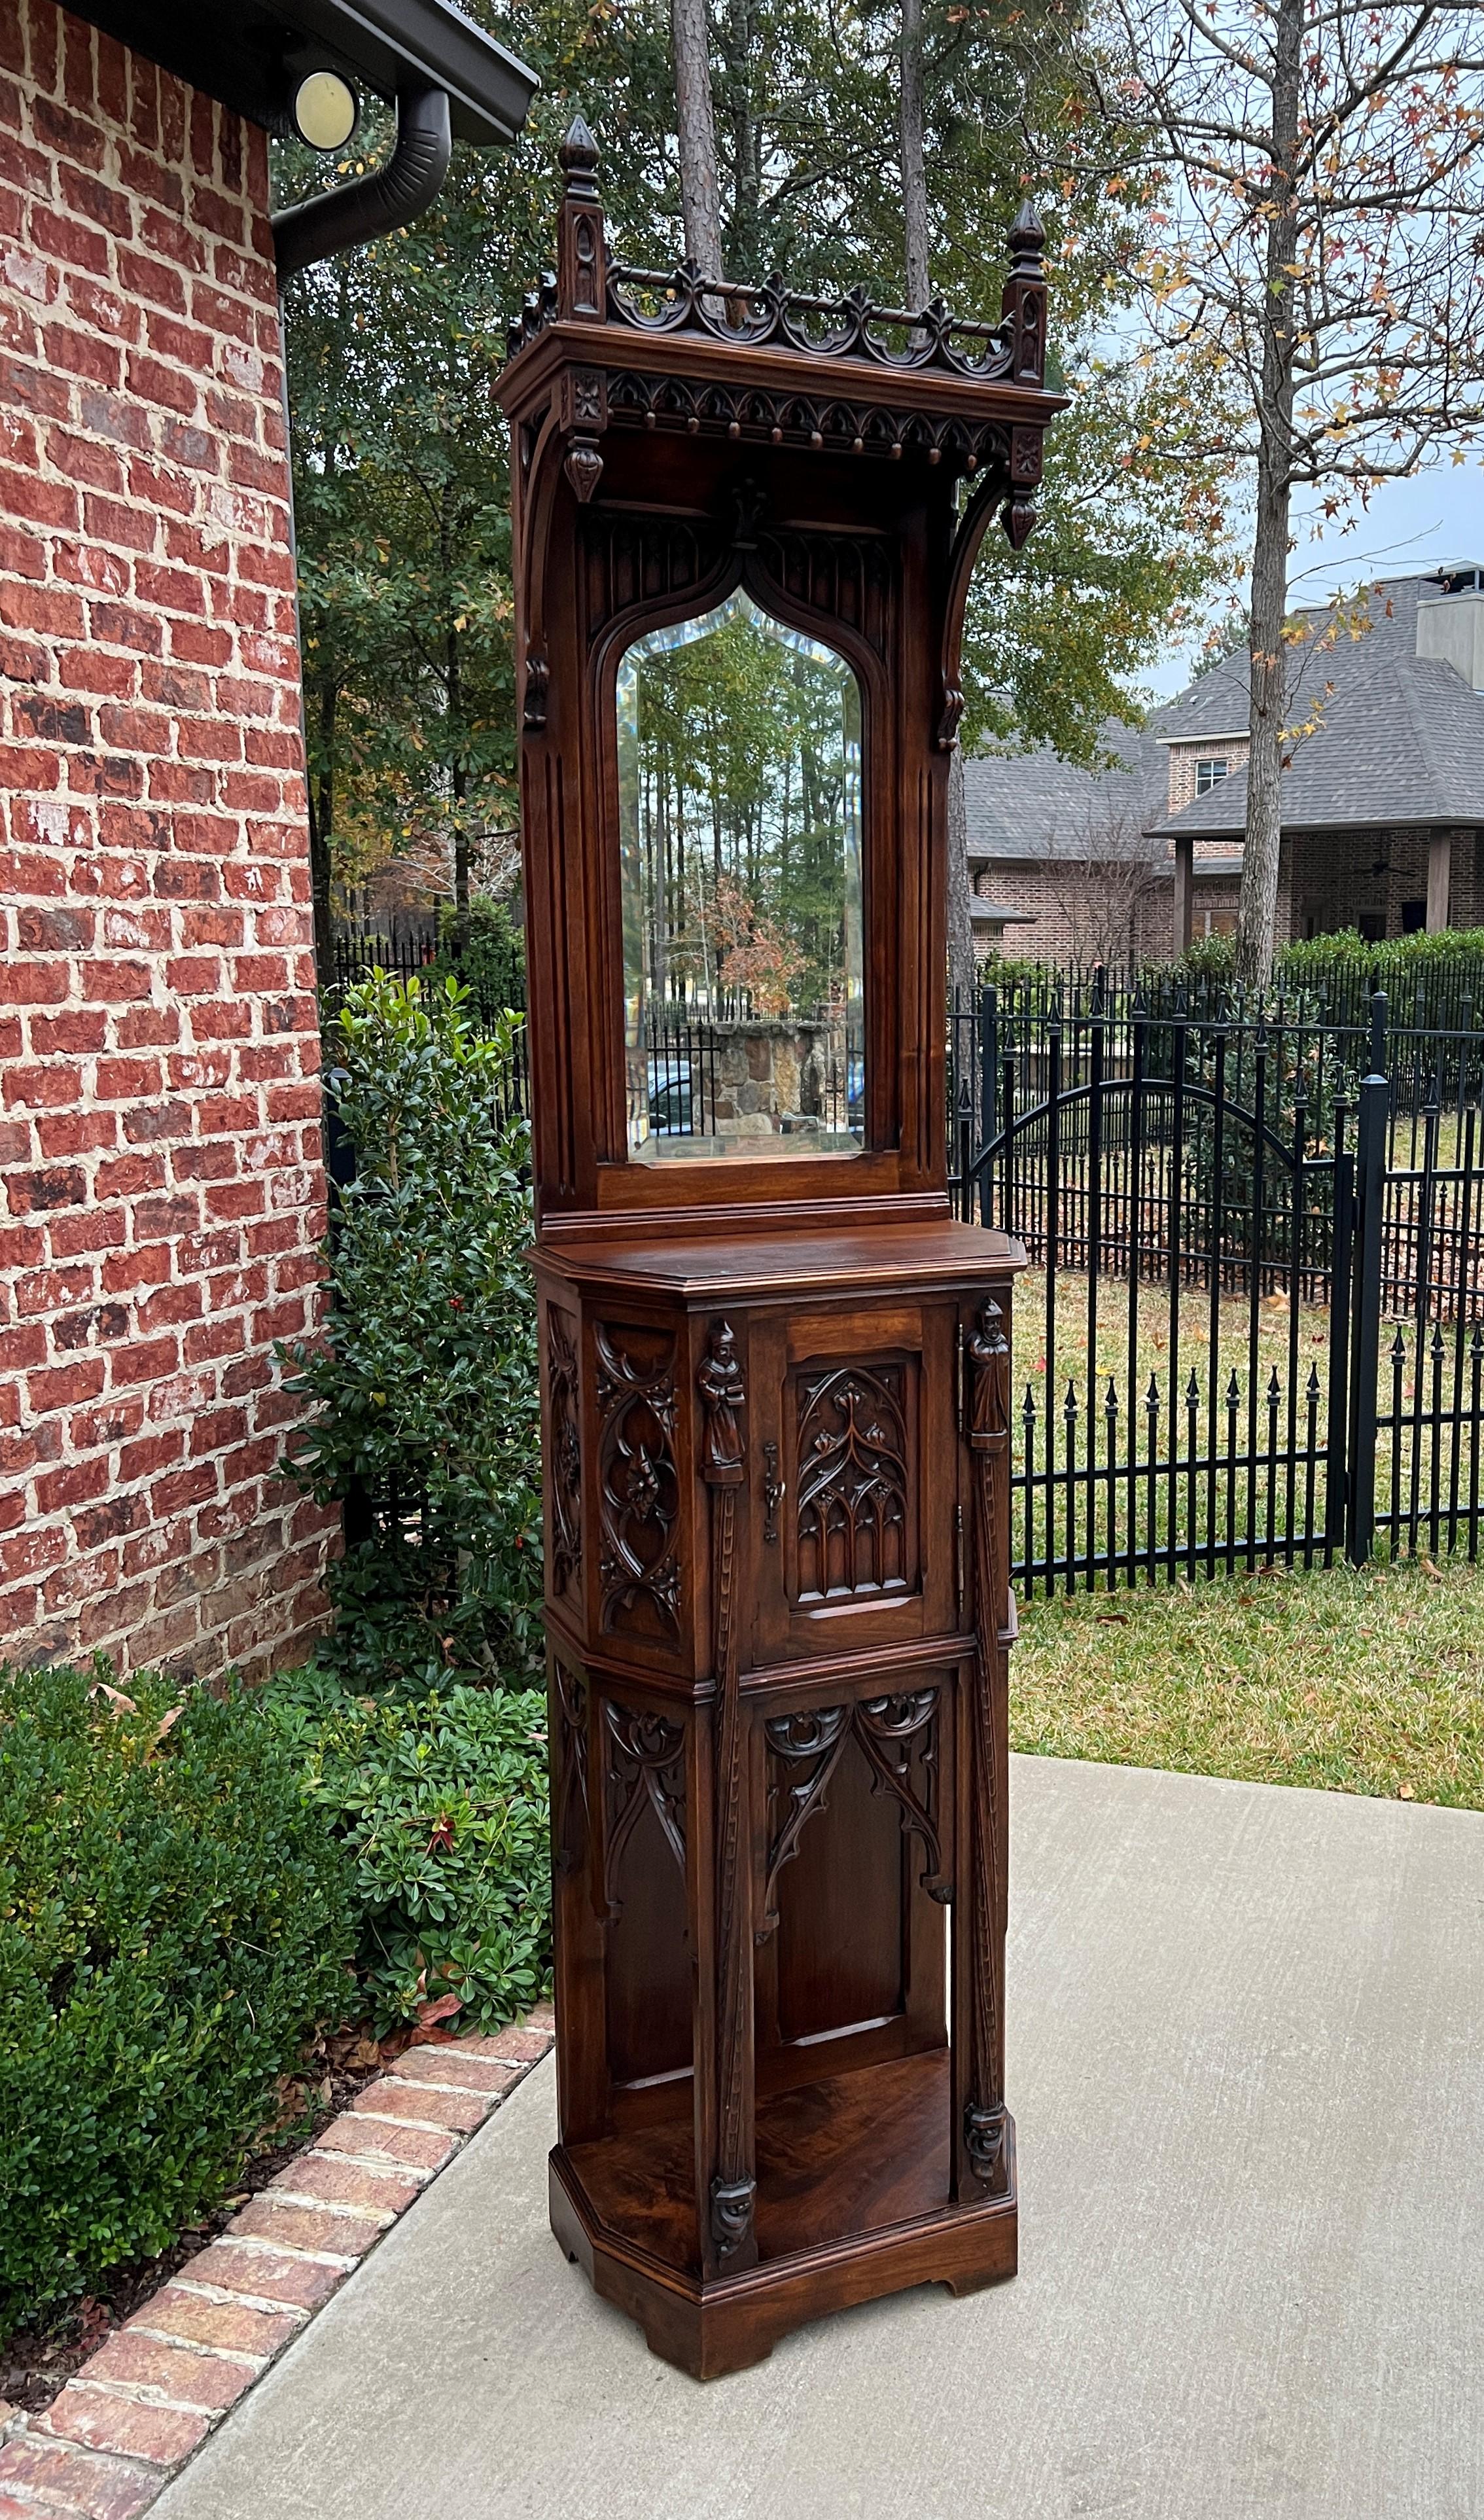 Antique French Gothic Revival Carved walnut mirrored credence cupboard or cabinet~~versatile size~~c. 1880s

 Charming antique cabinet in popular French Gothic Revival style~~upper canopy with pierced gallery and drop finials, lower single cabinet